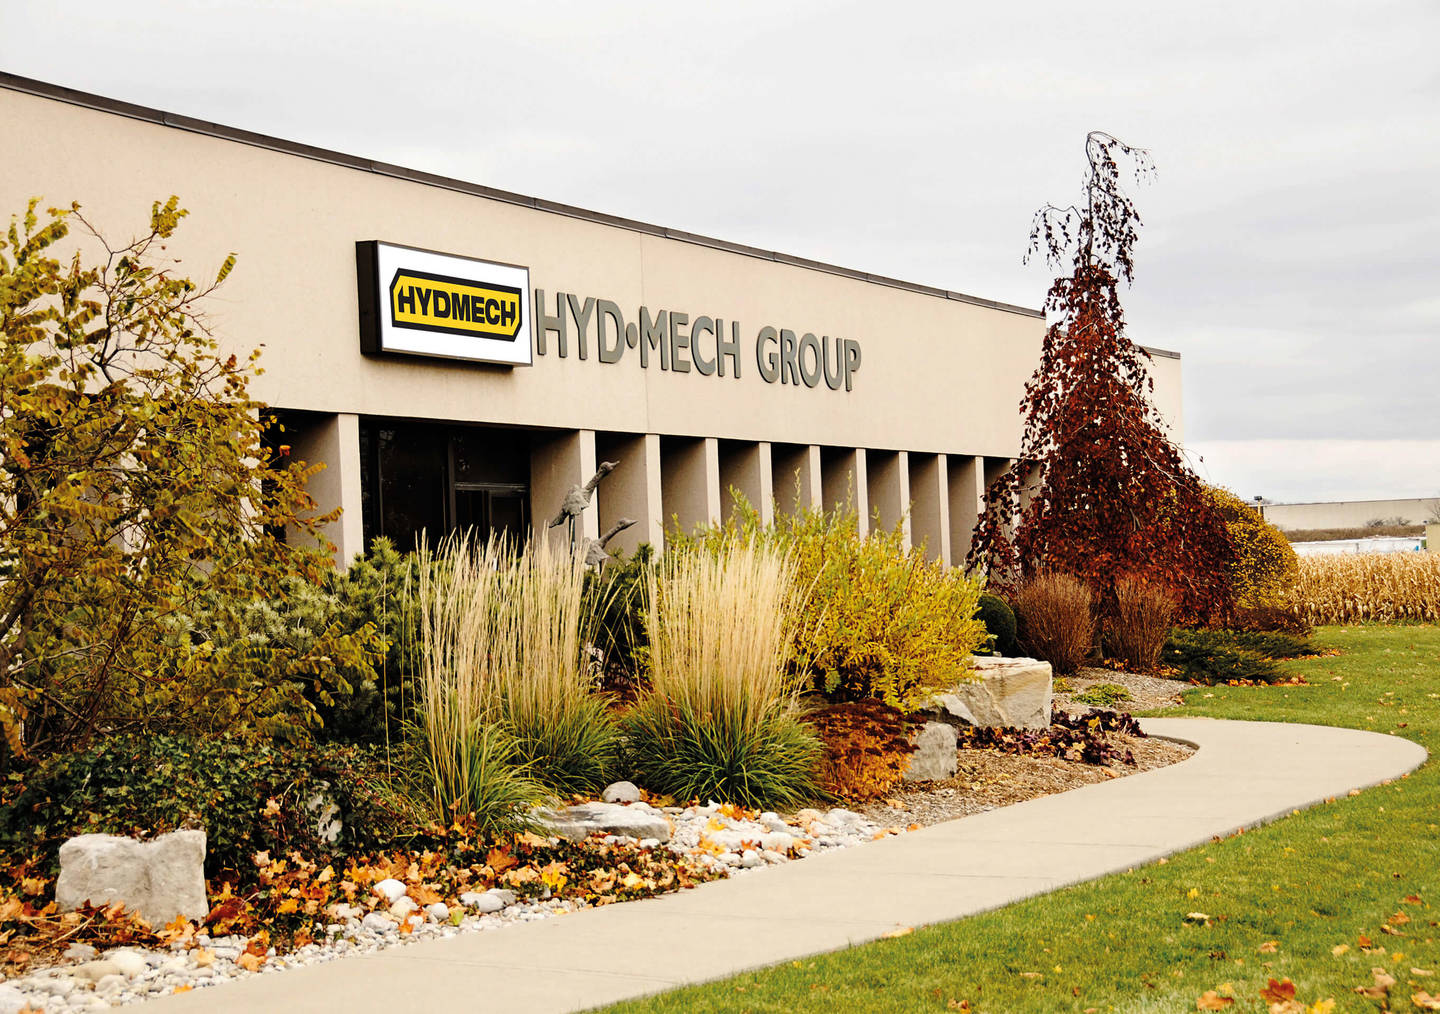 Mep Segatrici acquired HYDMECH in 2007 | © MEP S.p.A. - Circular and band sawing machines to cut metals